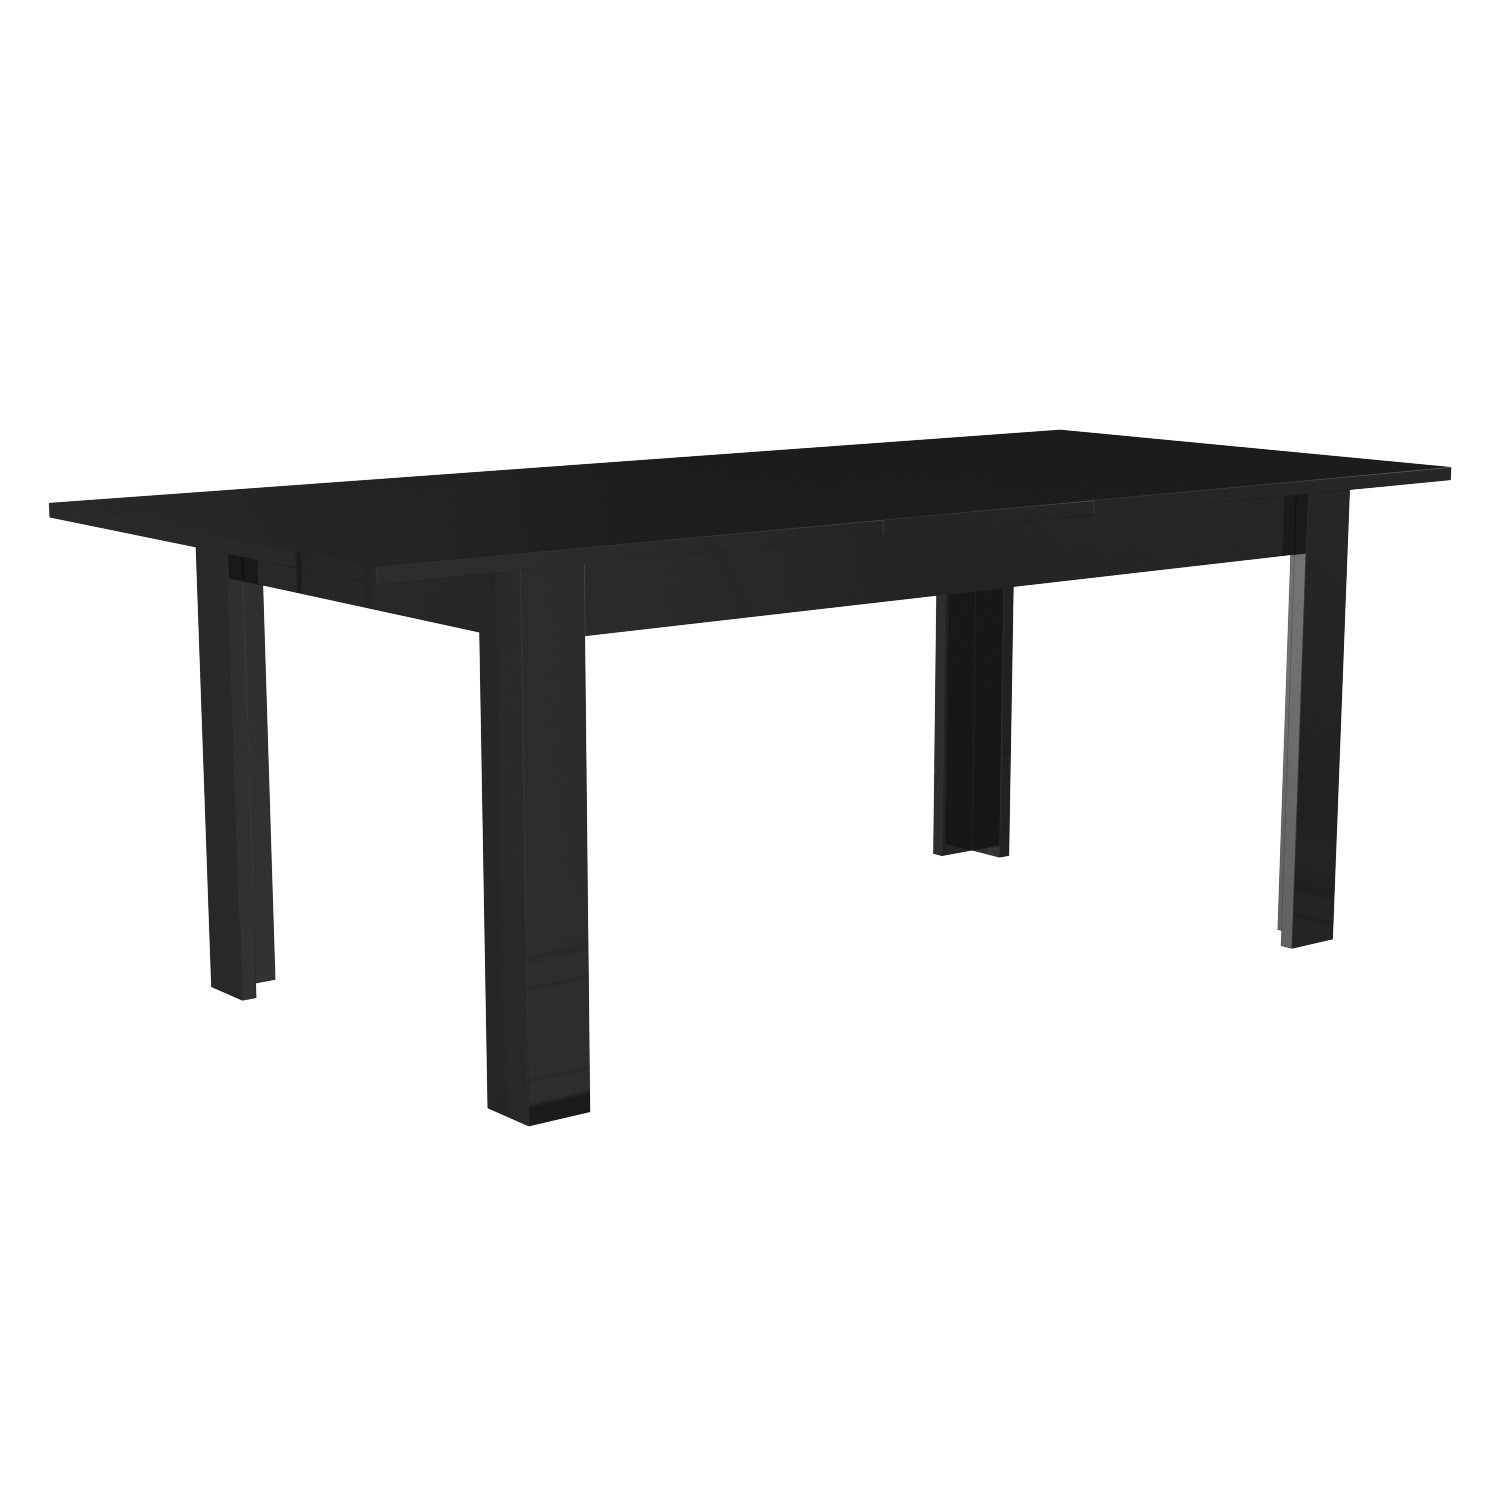 Photo of Large black high gloss modern extendable dining table - seats 4-6 - vivienne